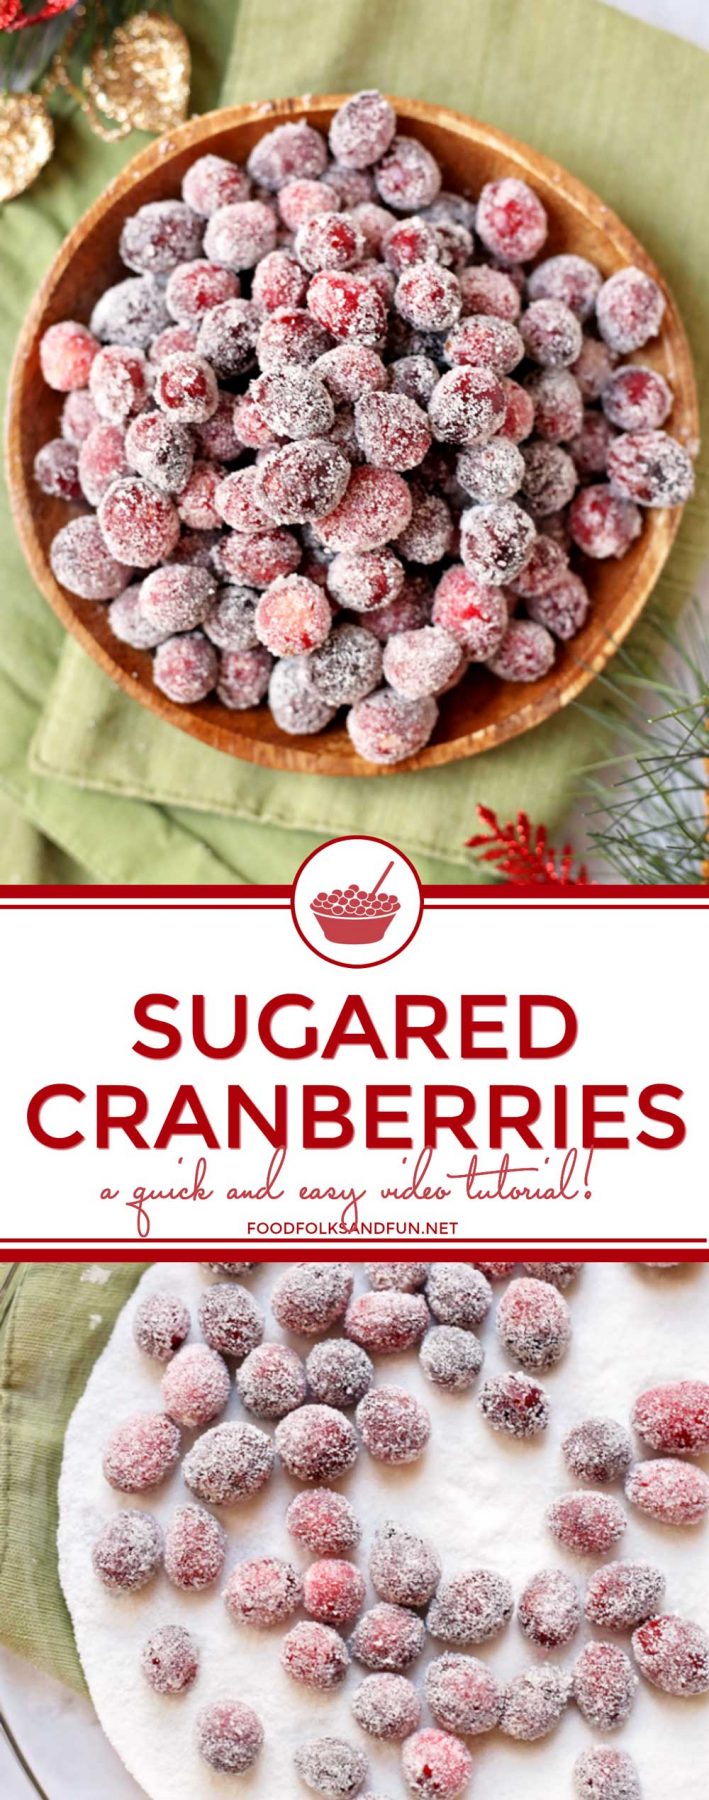 Enjoy this easy tutorial for Sugared Cranberries; they're the perfect holiday party snack. Add them to holiday cookies and cakes for some extra bling! via @foodfolksandfun